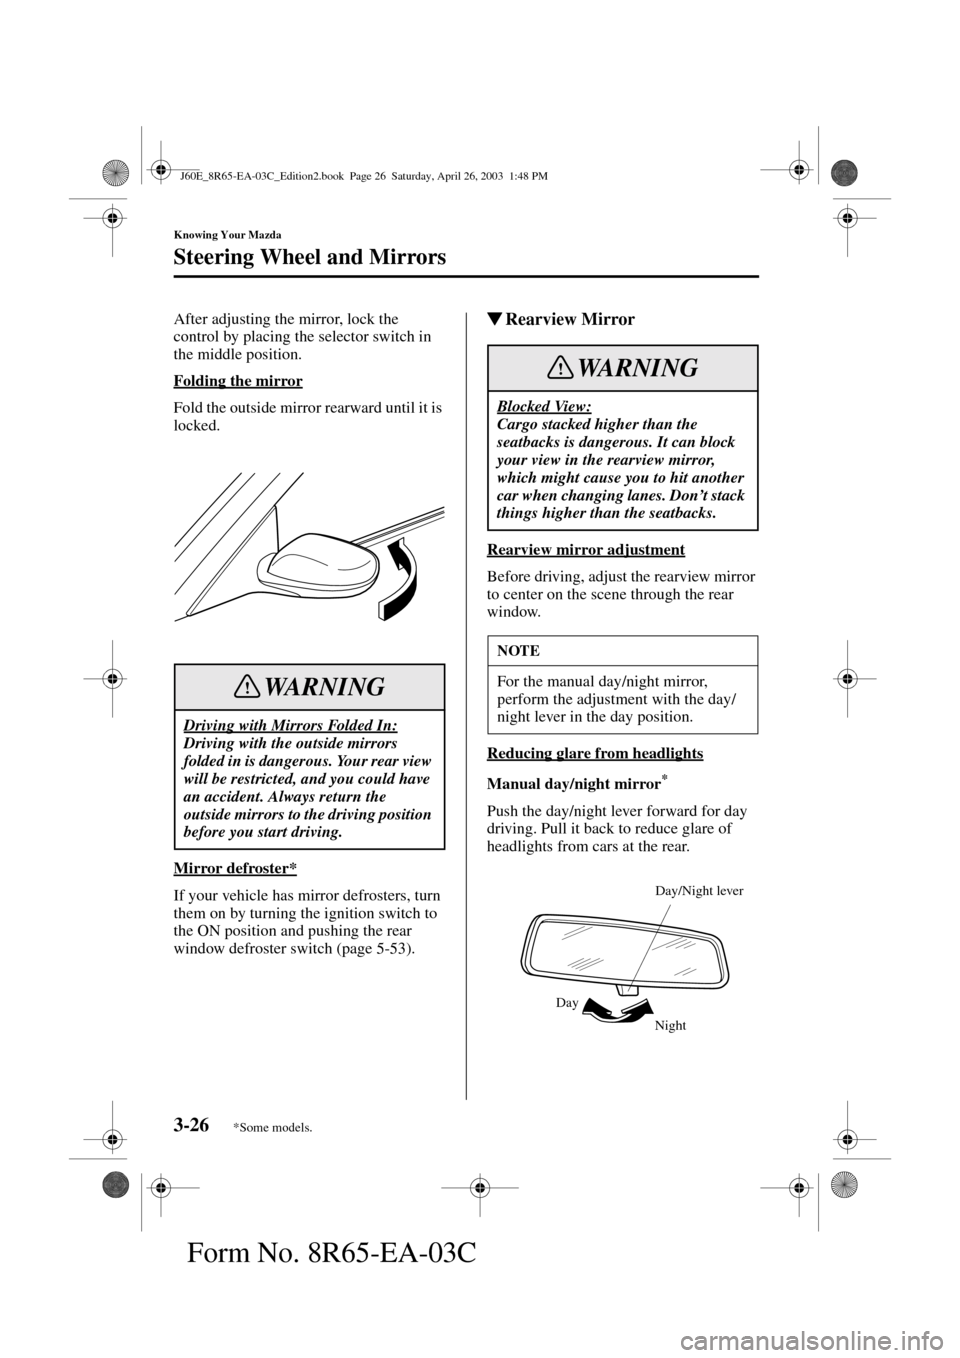 MAZDA MODEL RX 8 2004  Owners Manual (in English) 3-26
Knowing Your Mazda
Steering Wheel and Mirrors
Form No. 8R65-EA-03C
After adjusting the mirror, lock the 
control by placing the selector switch in 
the middle position.
Folding the mirror
Fold th